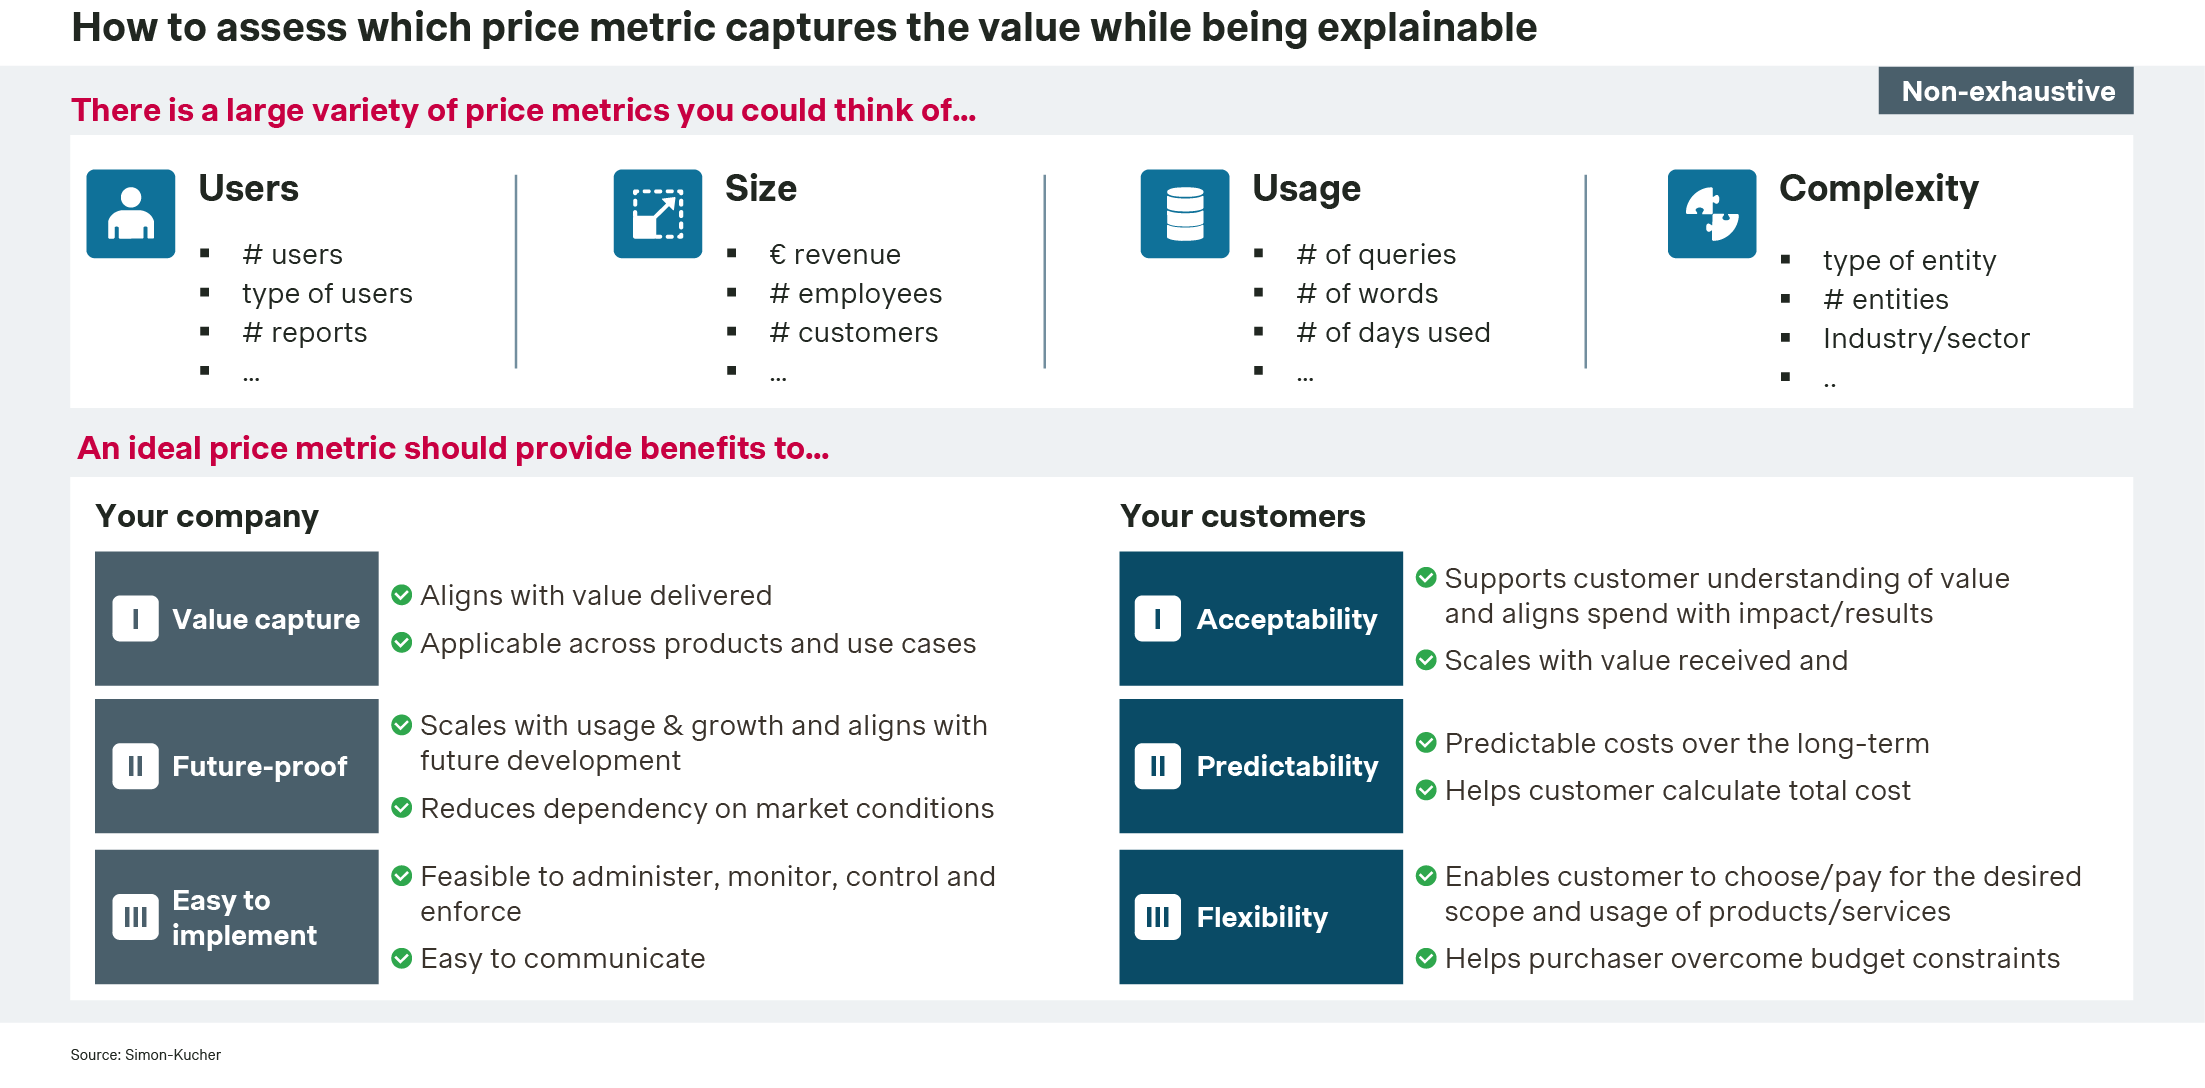 How to assess which price metric captures the value while being explainable.